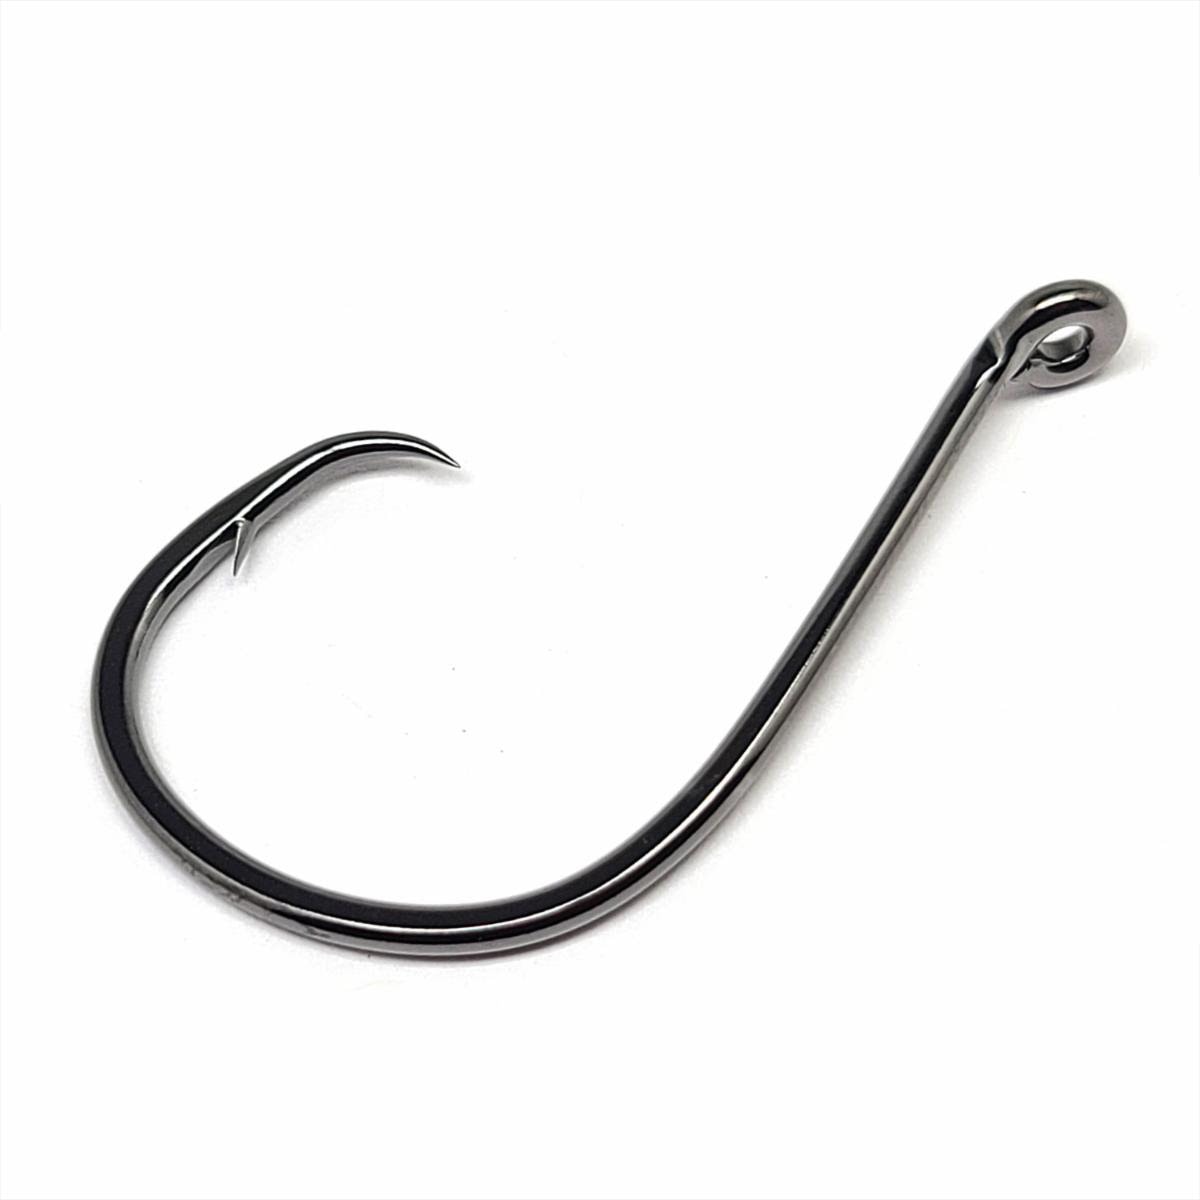 New for ICAST: Gamakatsu's Octopus Inline Point Circle Hooks